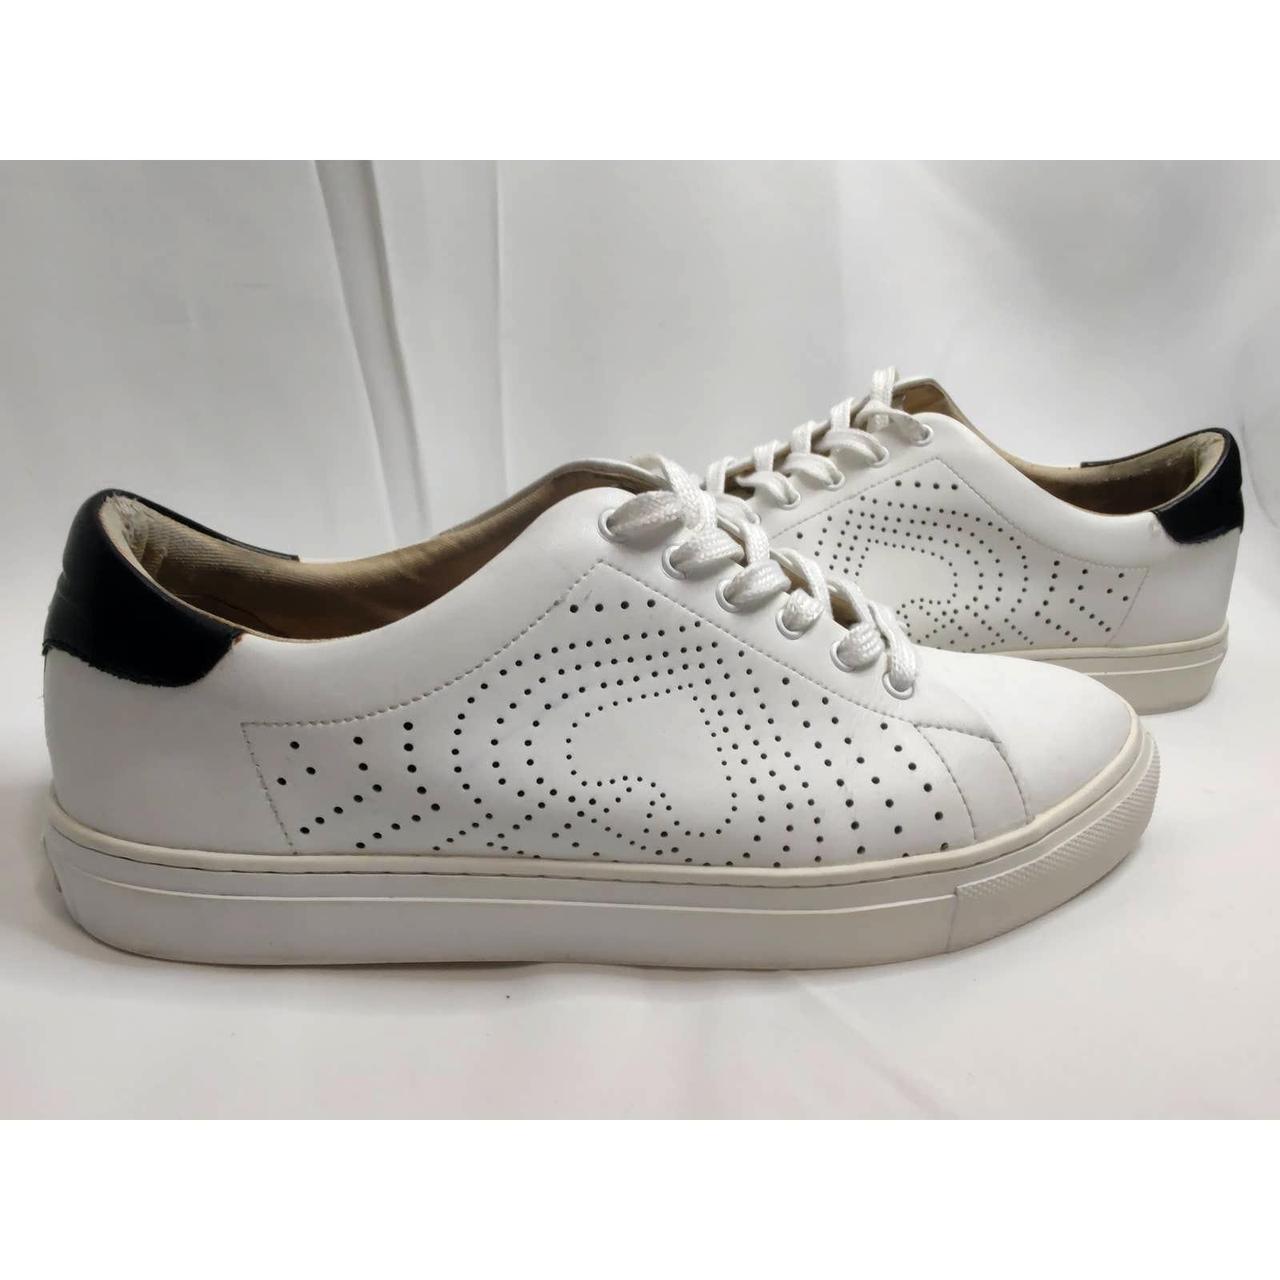 Kate Spade New York Women's White and Black Trainers | Depop